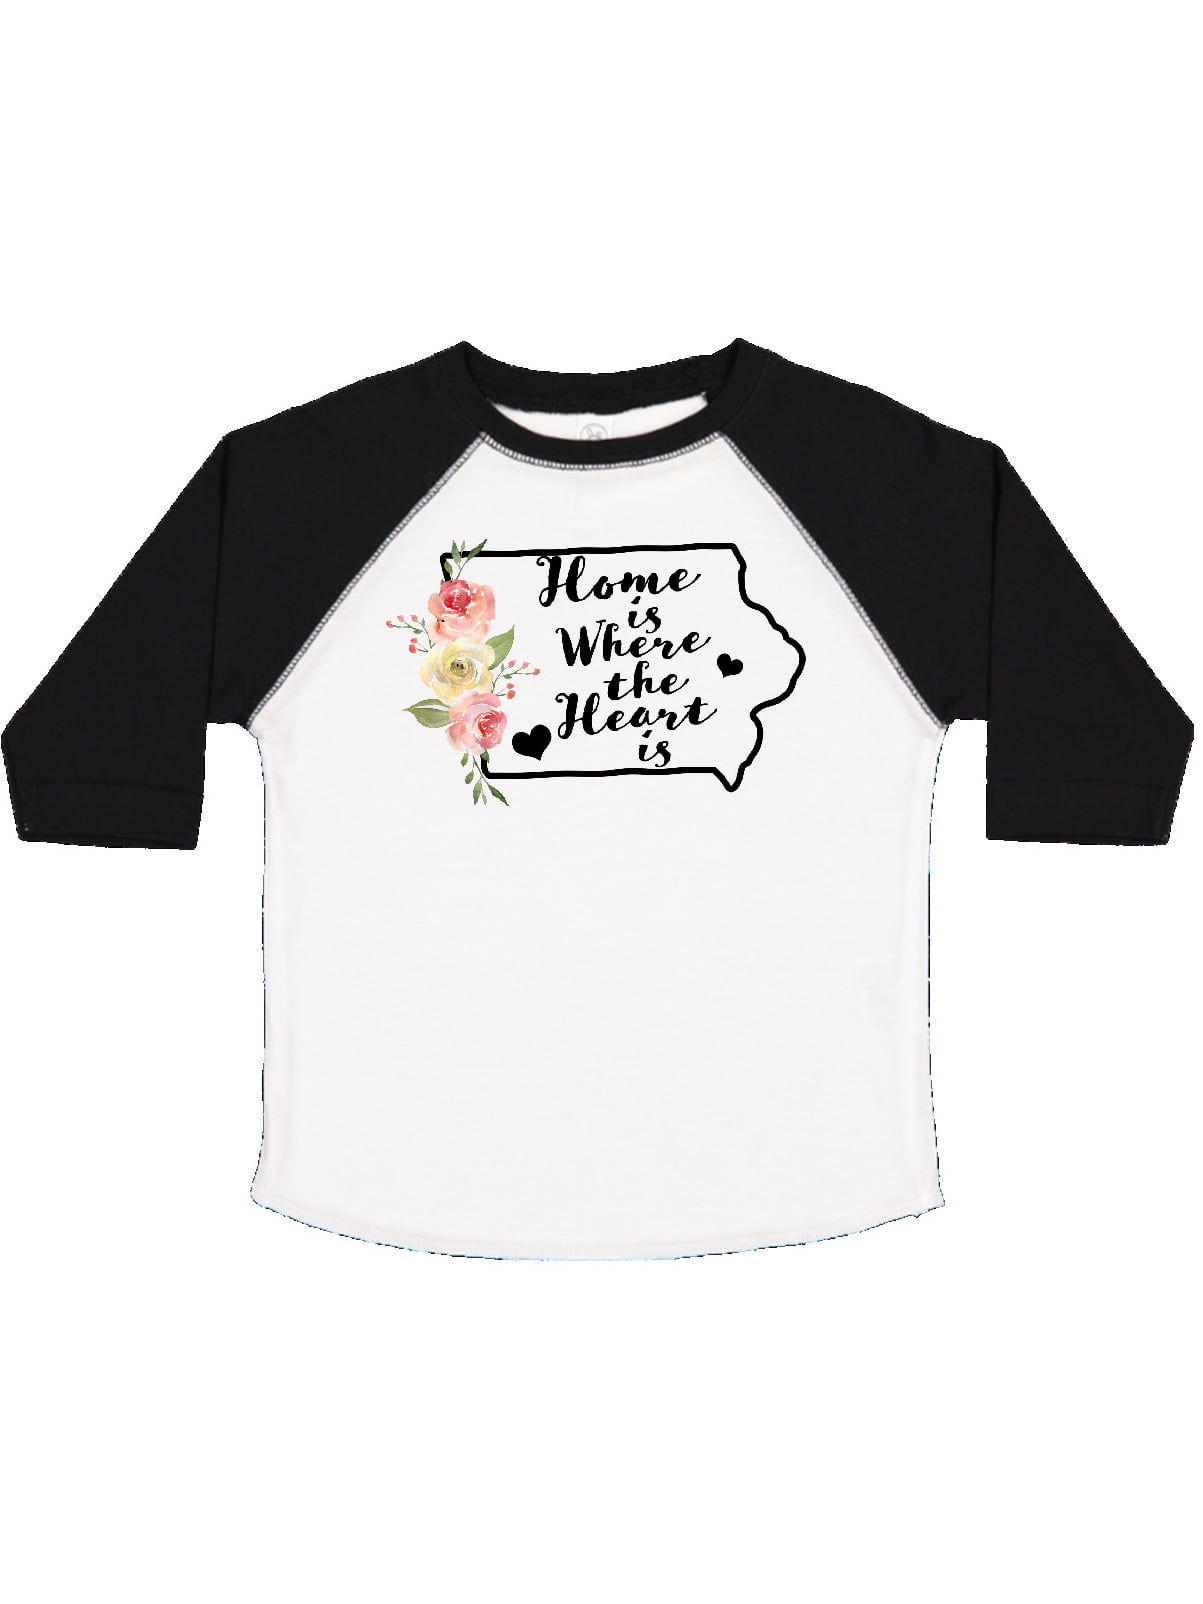 inktastic Home is Where The Heart is Toddler T-Shirt 